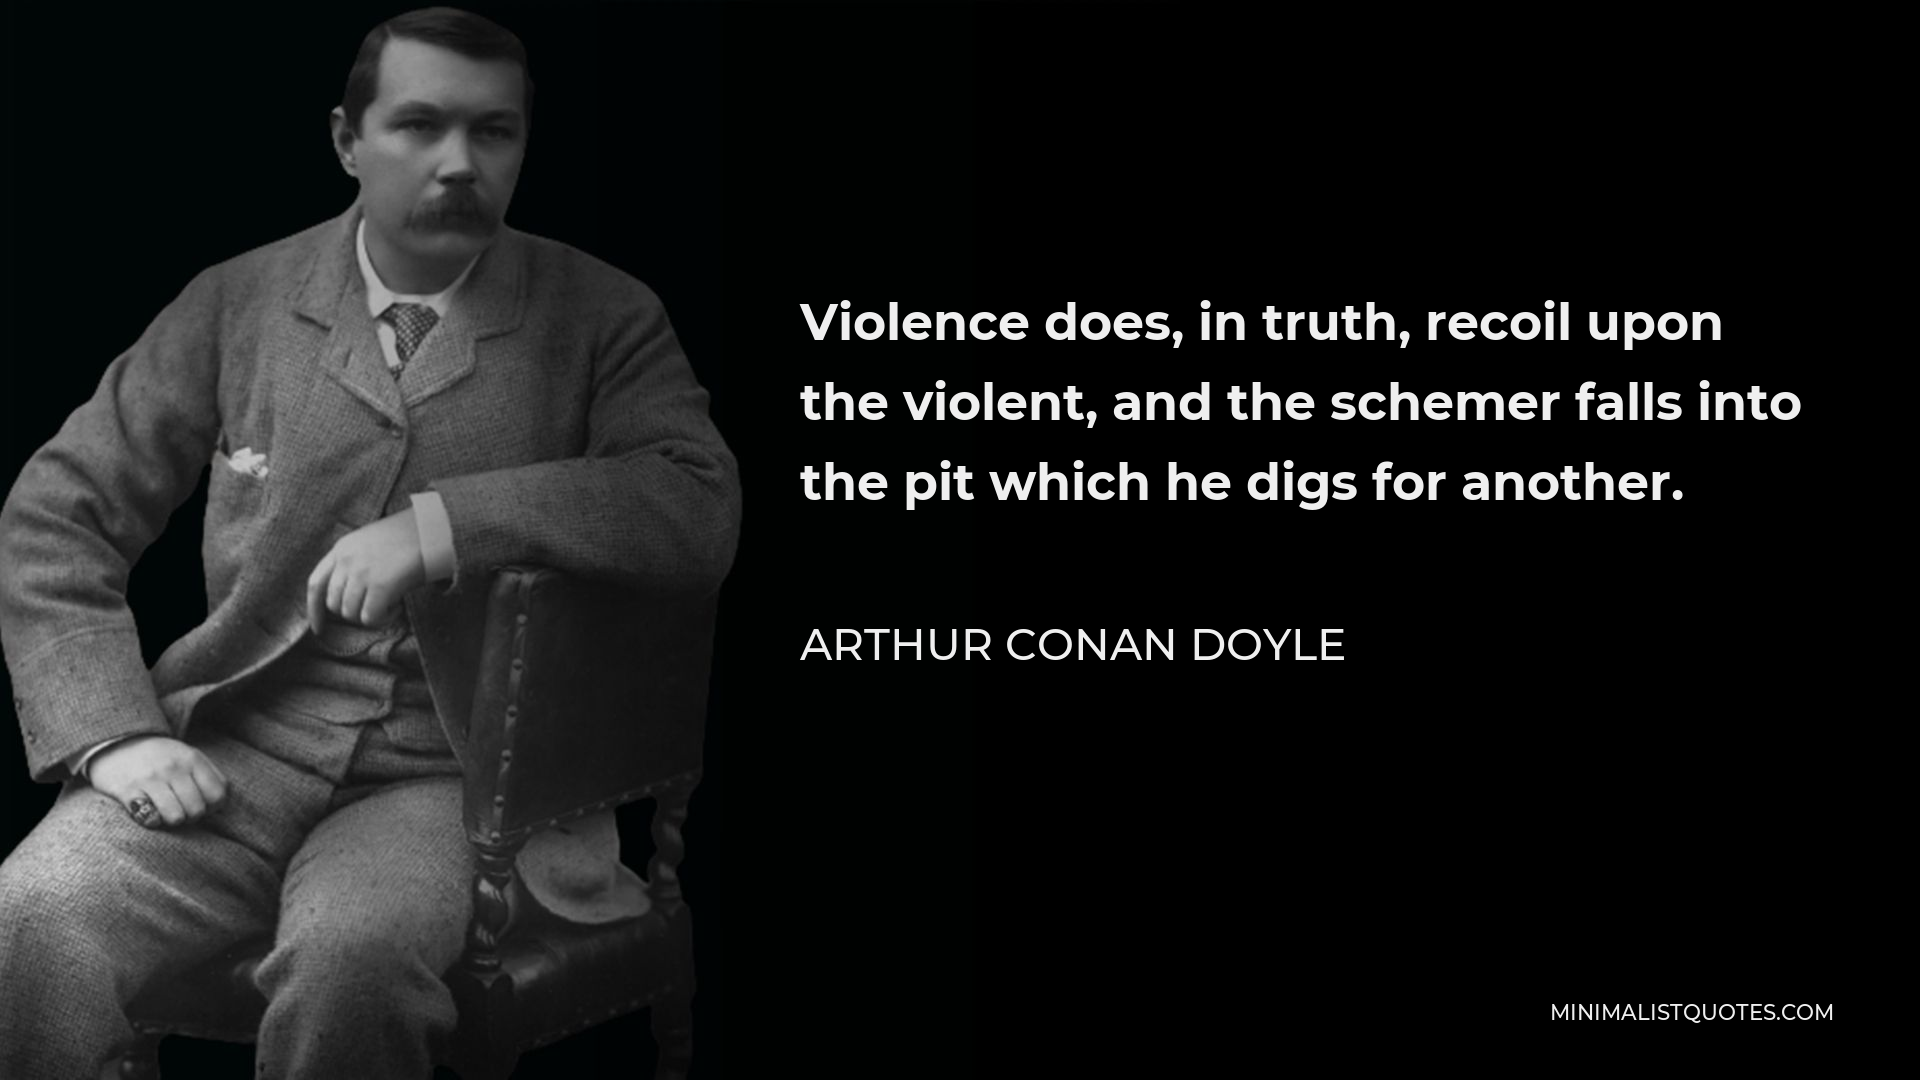 Arthur Conan Doyle Quote - Violence does, in truth, recoil upon the violent, and the schemer falls into the pit which he digs for another.